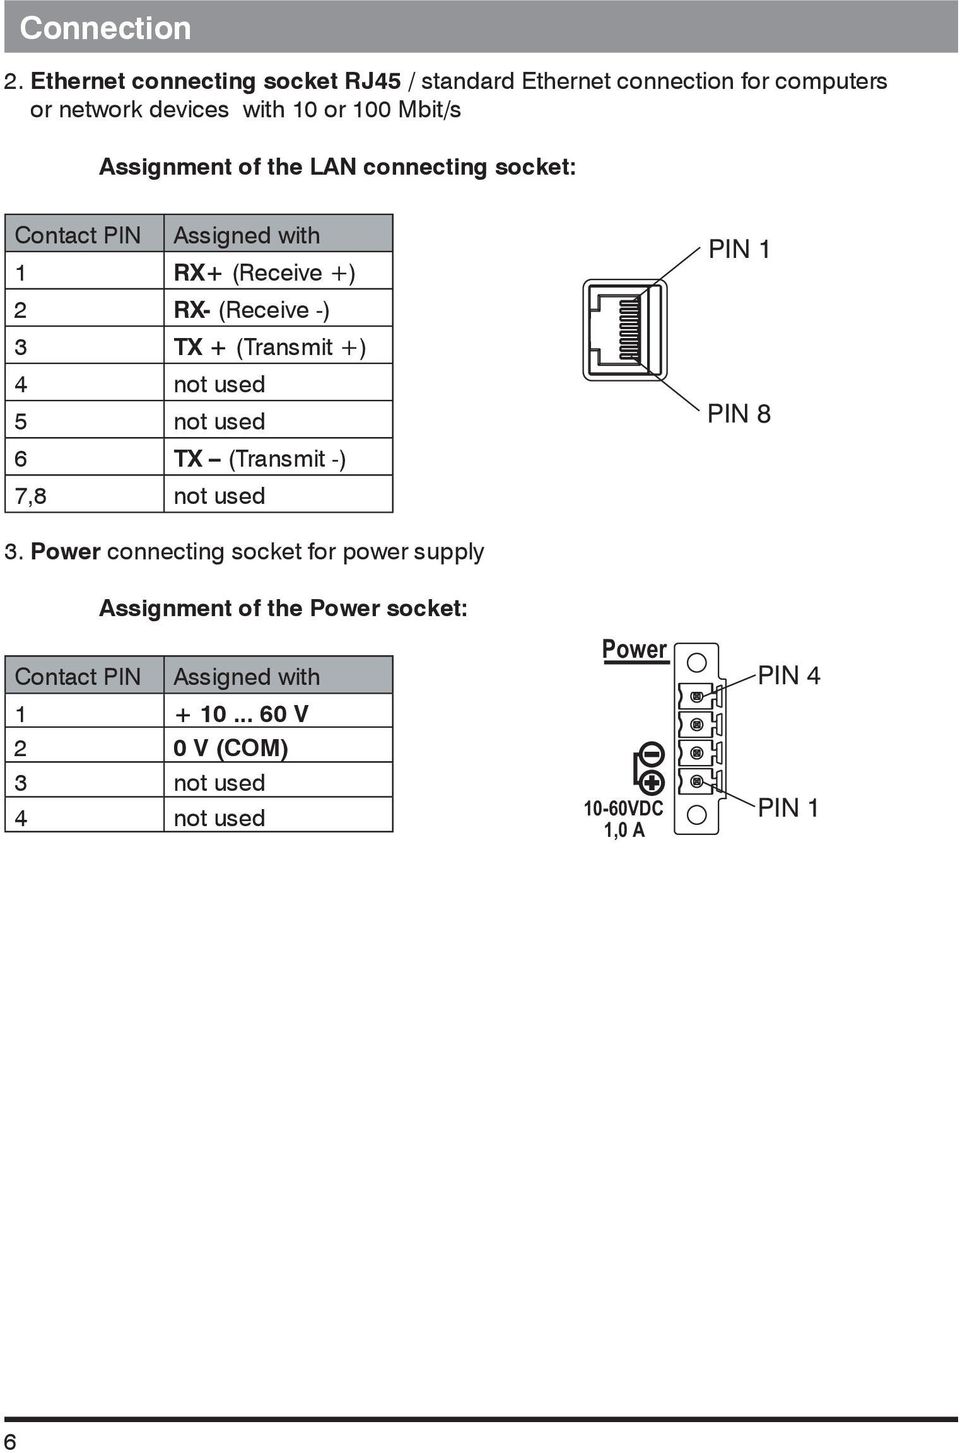 Assignment of the LAN connecting socket: Contact PIN Assigned with 1 RX+ (Receive +) 2 RX- (Receive -) 3 TX + (Transmit +) 4